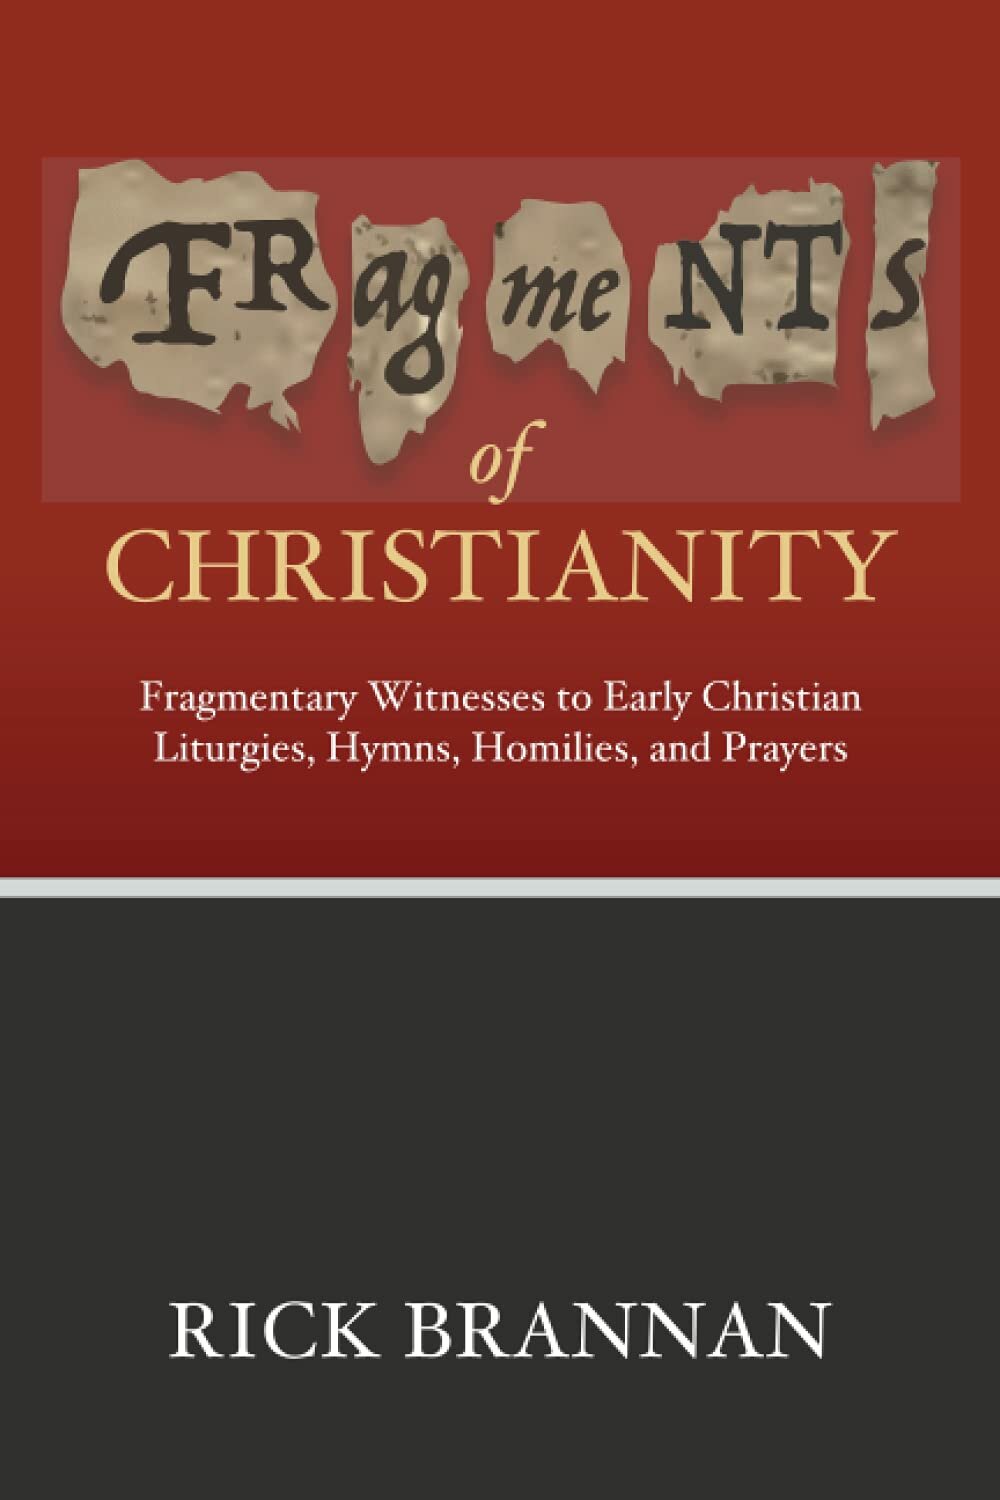 Fragments of Christianity: Fragmentary Witnesses to Early Christian Liturgies, Hymns, Homilies, and Prayers